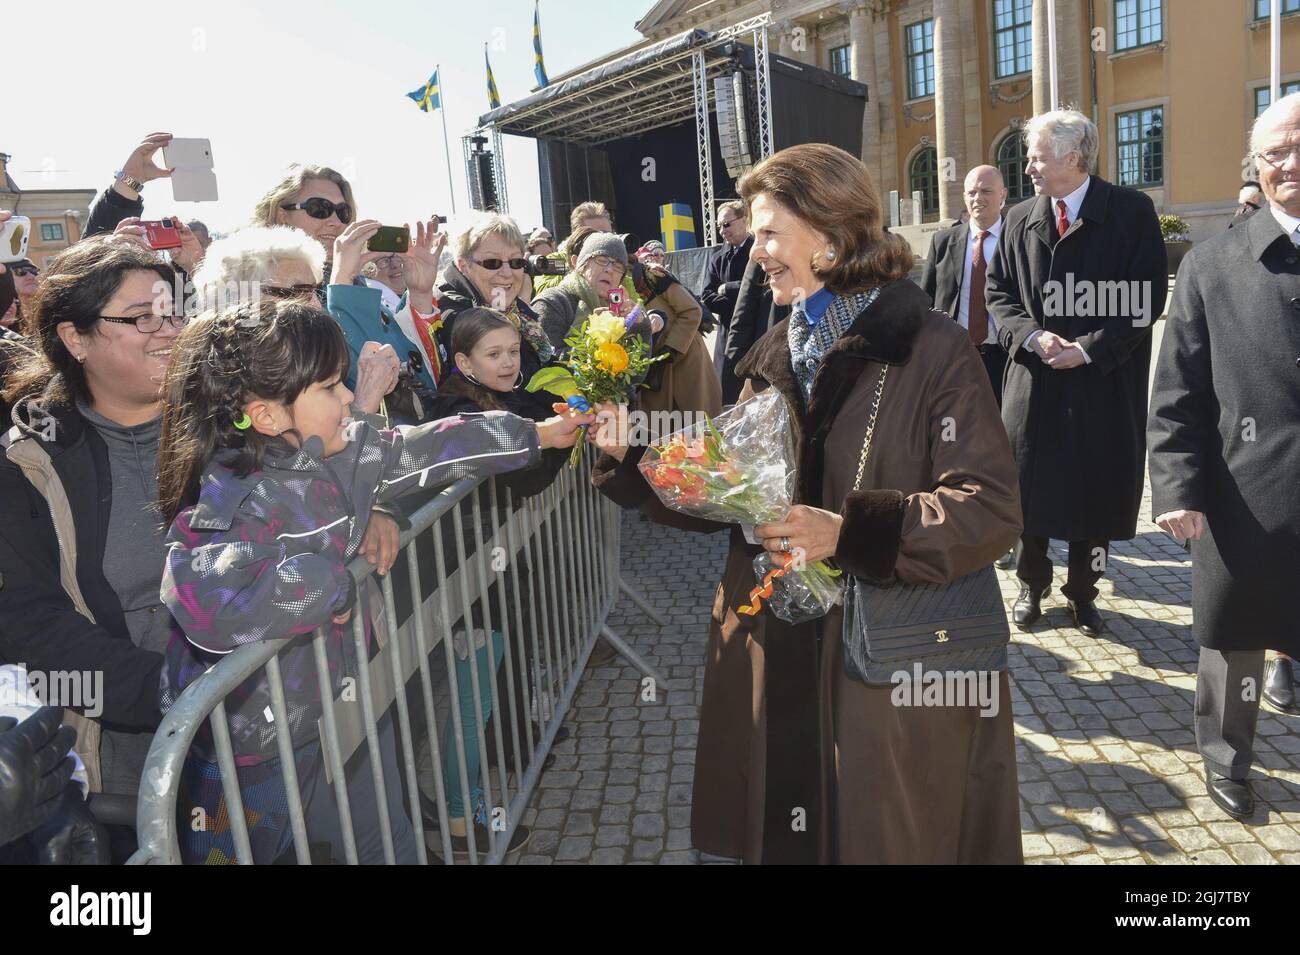 KARLSKRONA 2013-04-06 Queen Silvia receives flower from a small girl at the main square in Karlskrona, Southern Sweden, on April 6, 2013. The King and Queen are touring Sweden to mark the King's 40th anniversay on the throne. Foto: Jonas EkstrÃ¶mer / SCANPIX / Kod 10030 Stock Photo